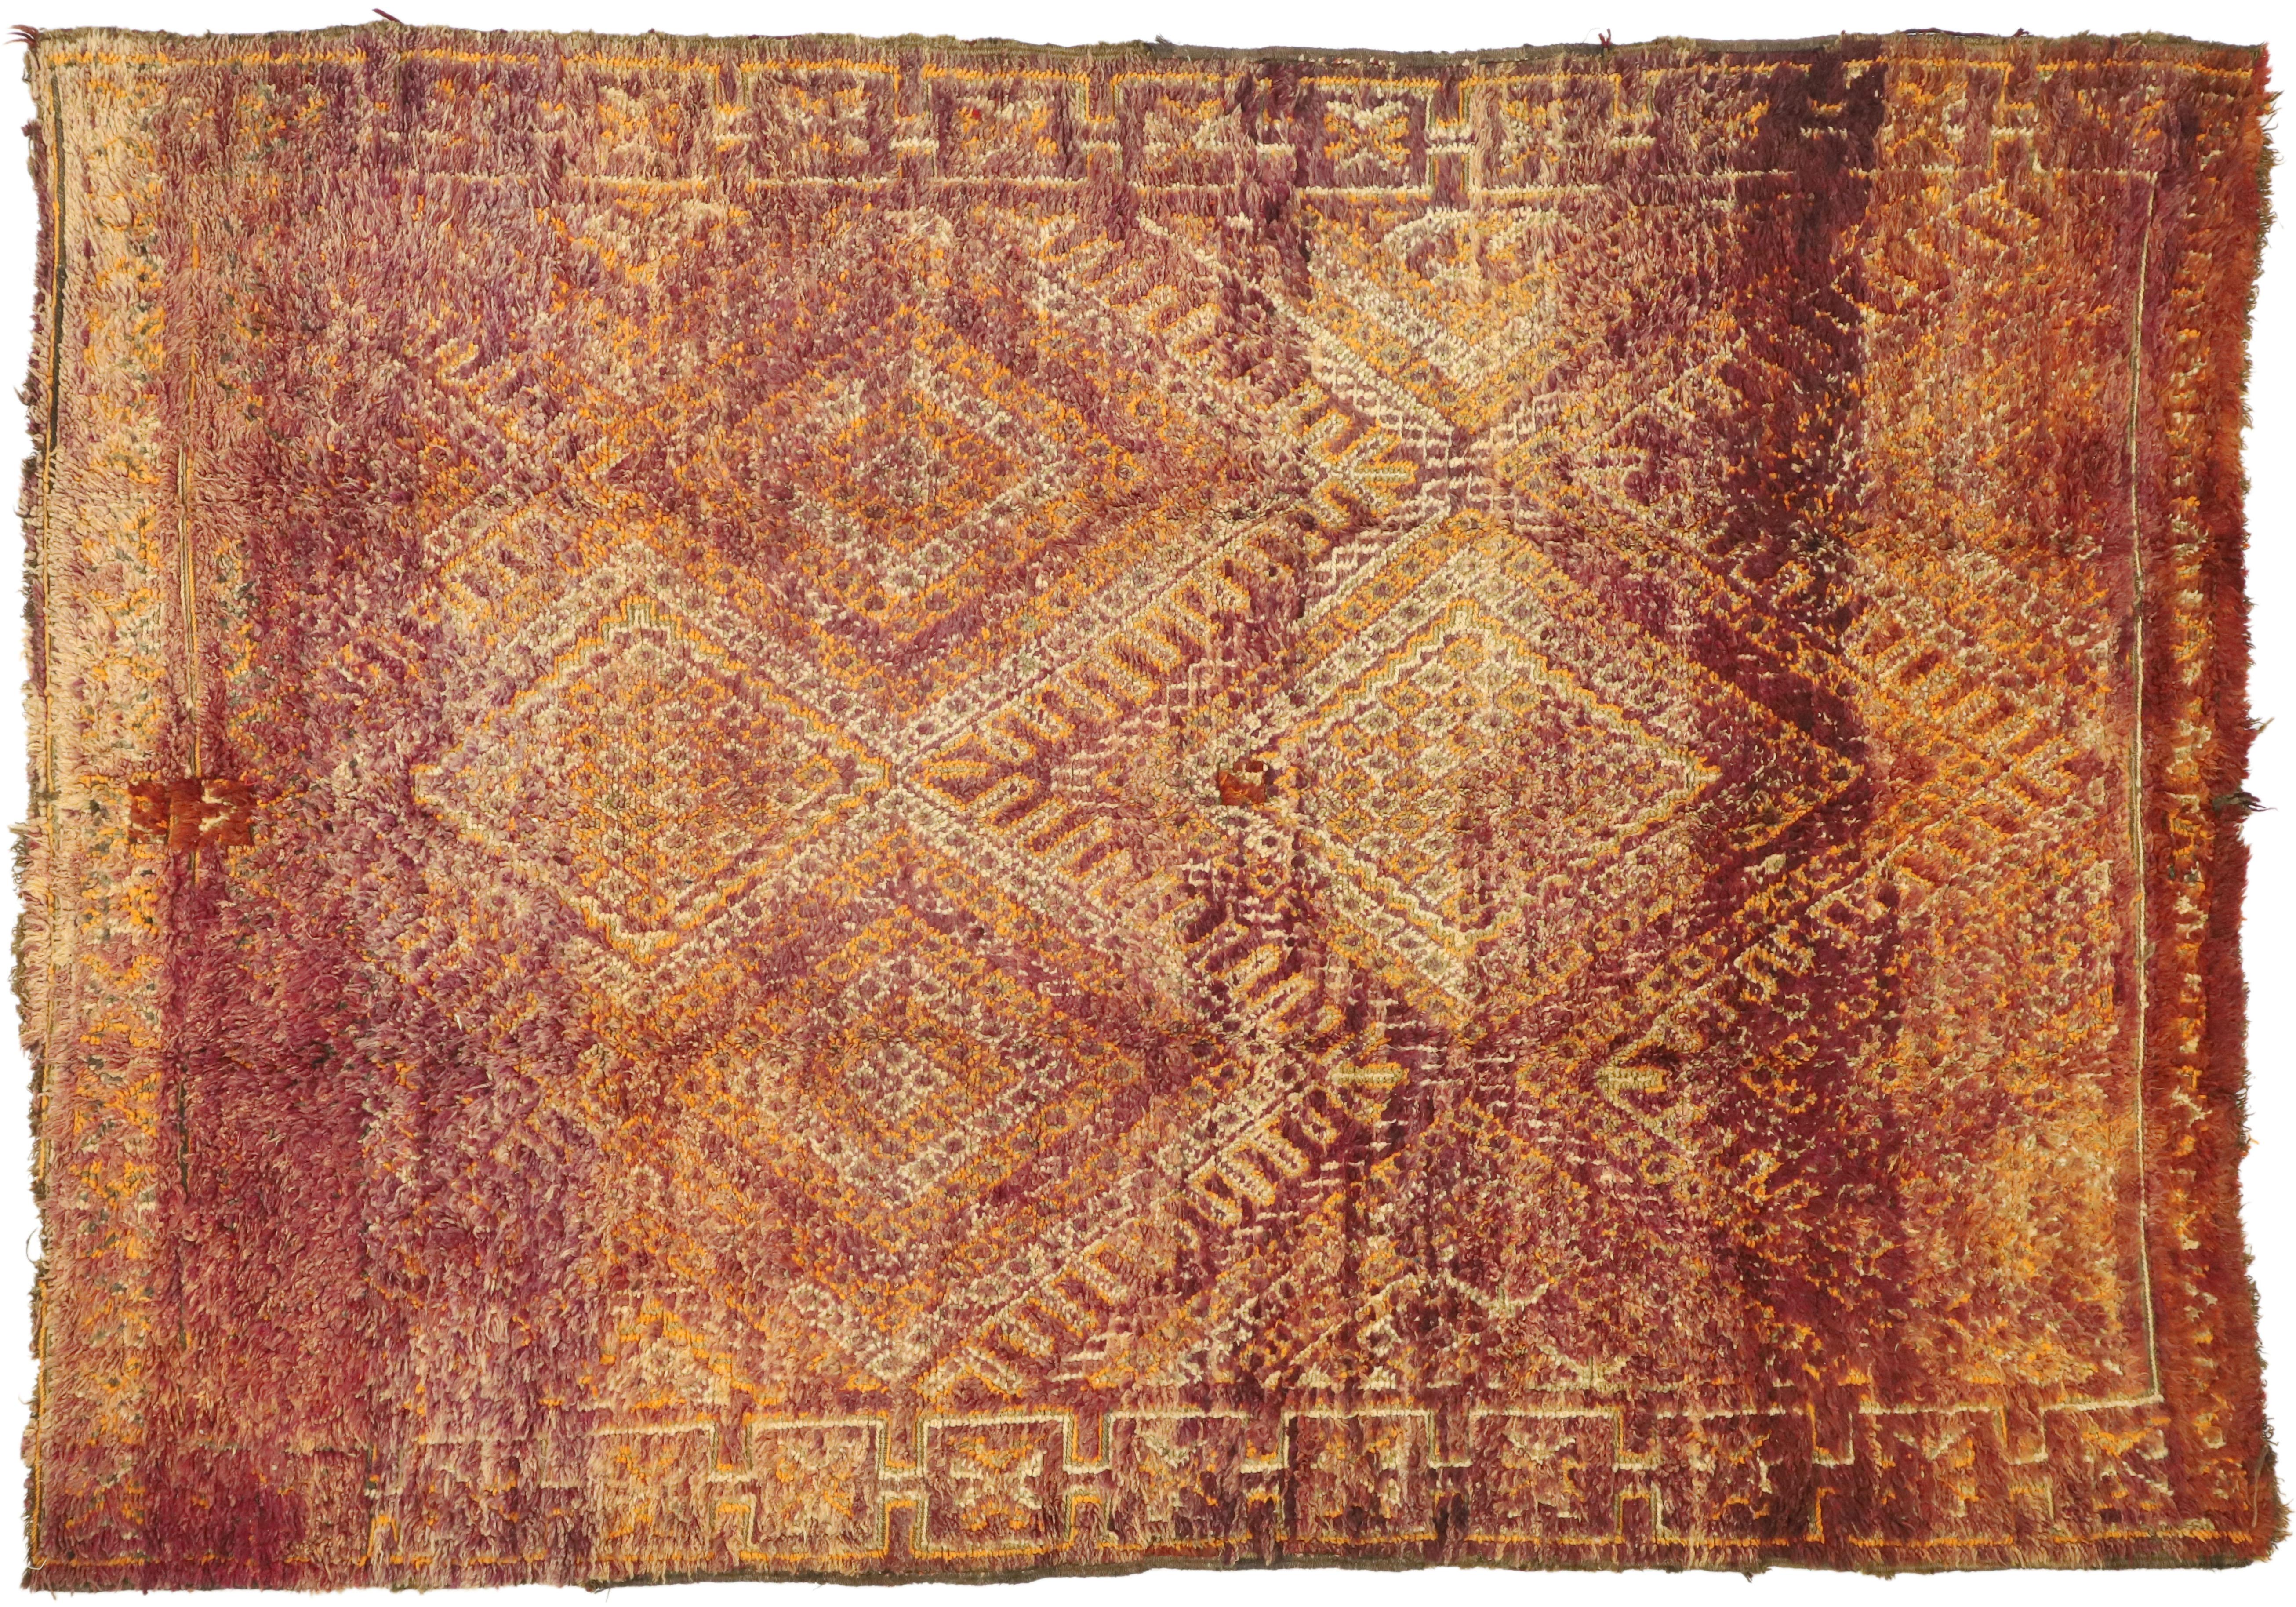 Vintage Beni M'Guild Moroccan Rug with a Diamond Pattern in Warm, Spicy Hues 2